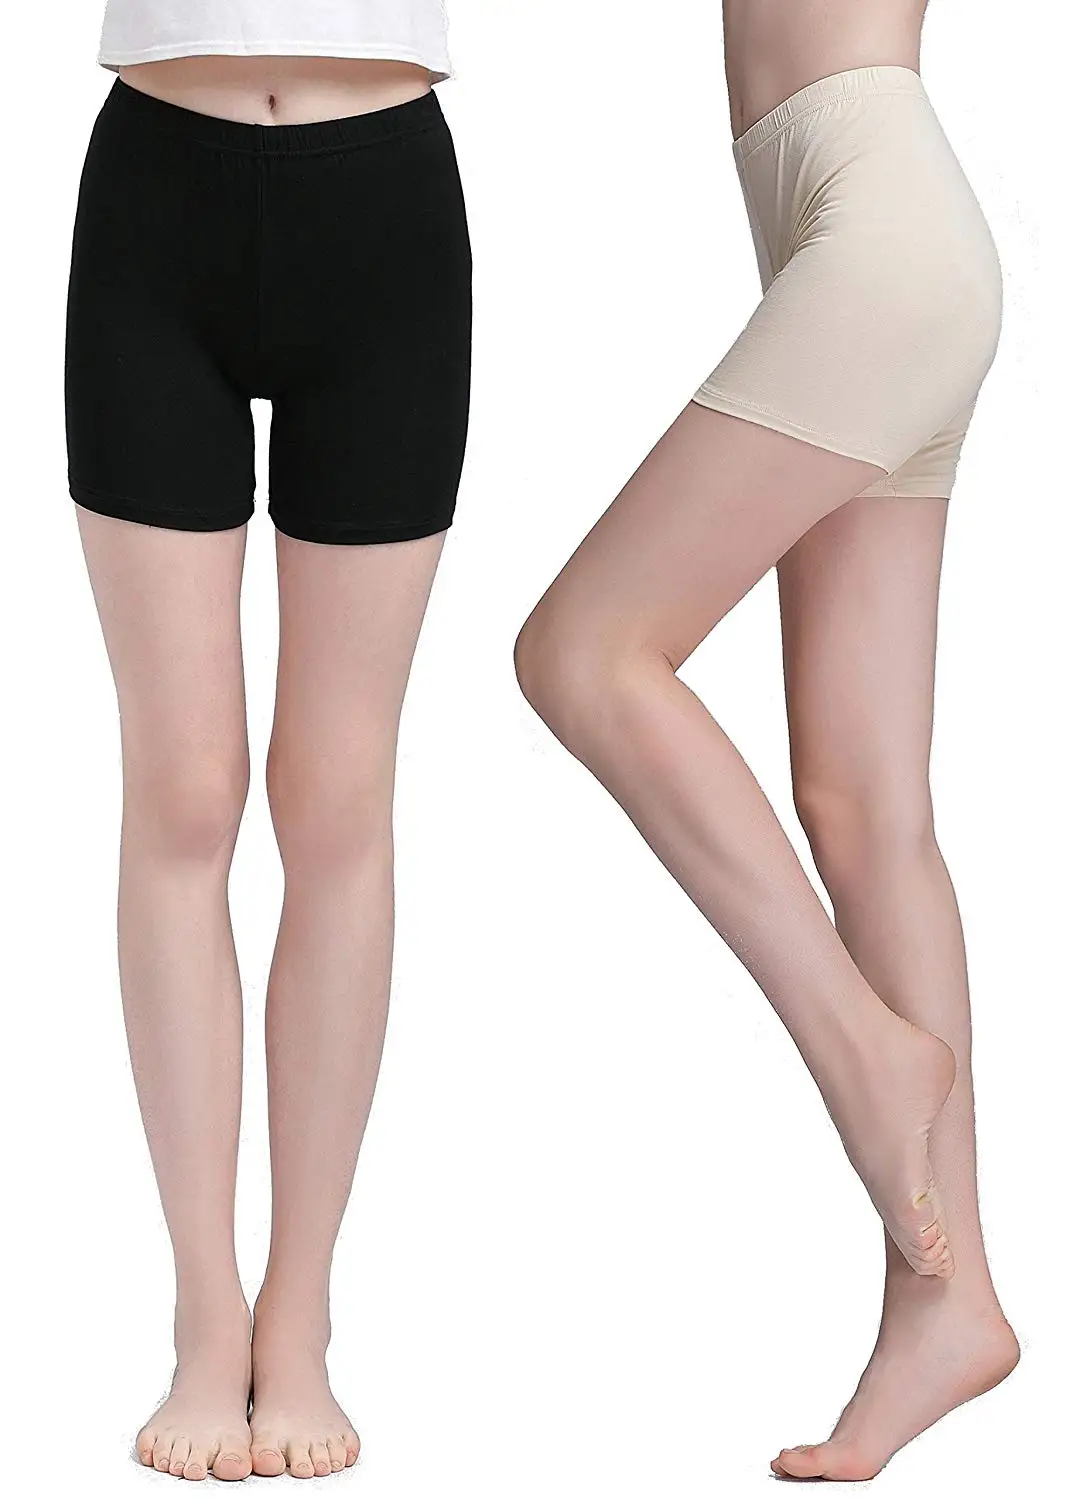 Ferrieswheel Story Women Under Dress Shorts Lace Breathable Safety Pants  Stretch Short Leggings